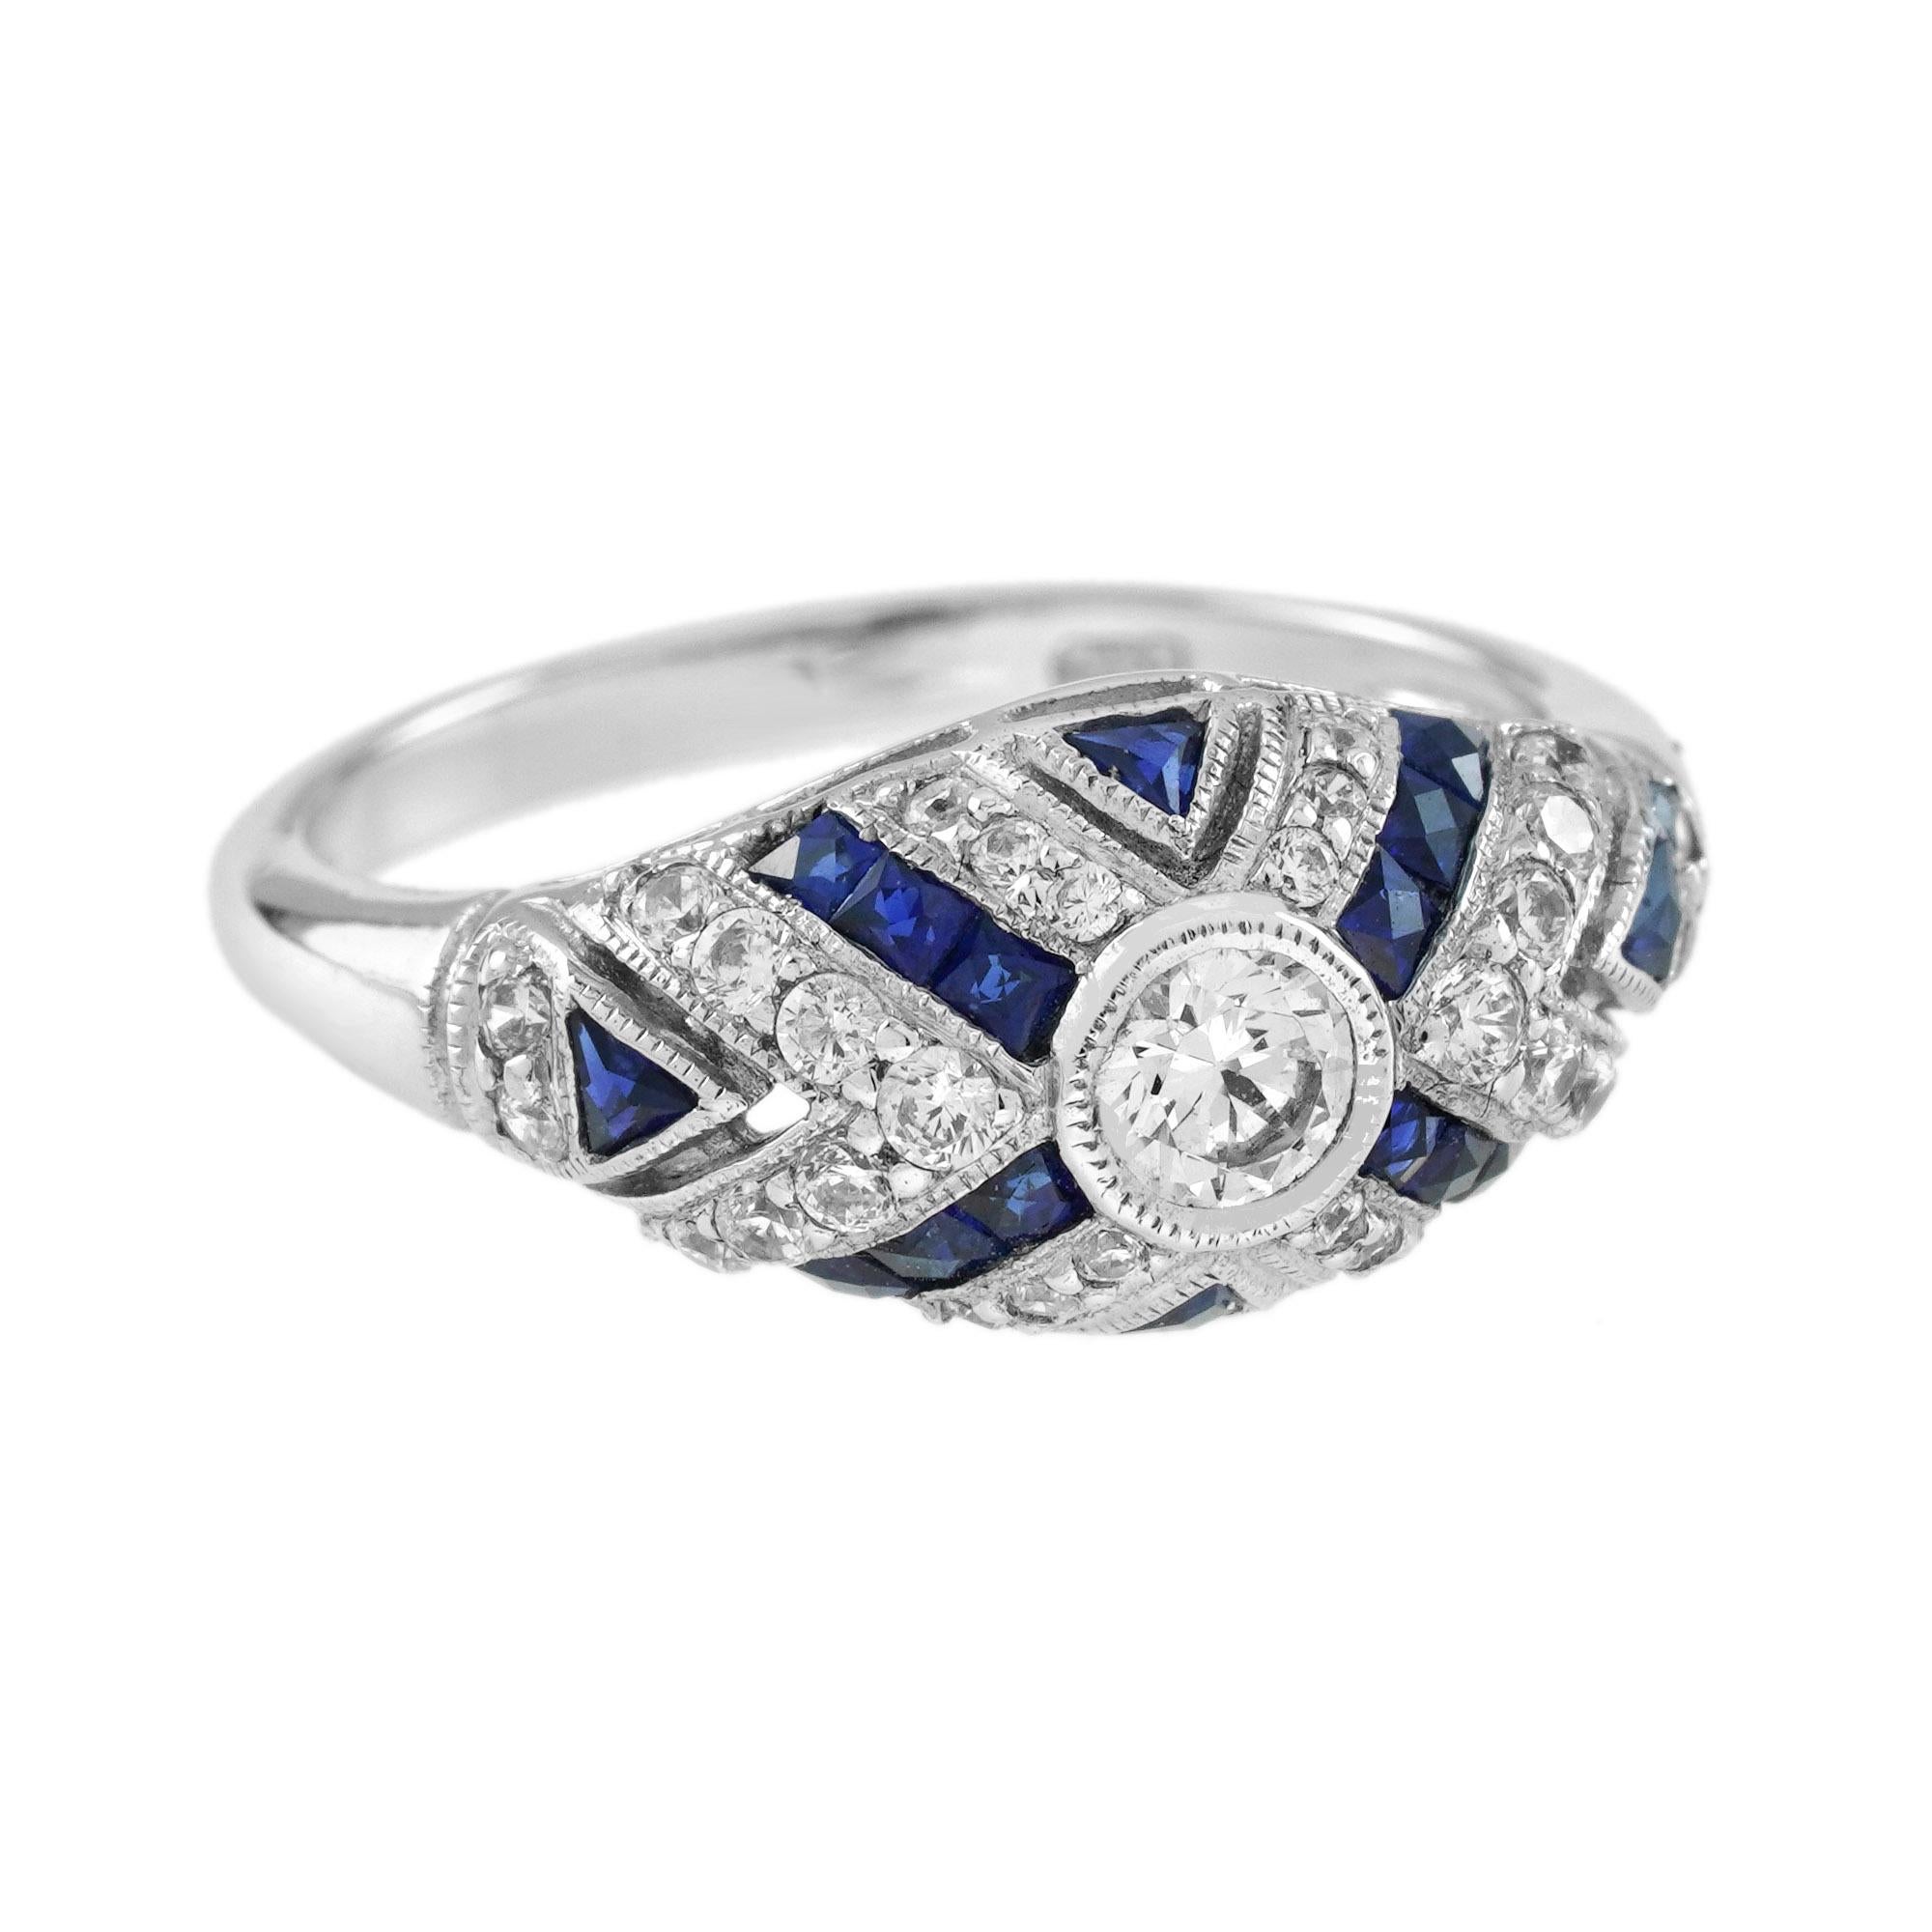 Round Cut Diamond and Blue Sapphire Art Deco Style Engagement Ring in 18K White Gold For Sale